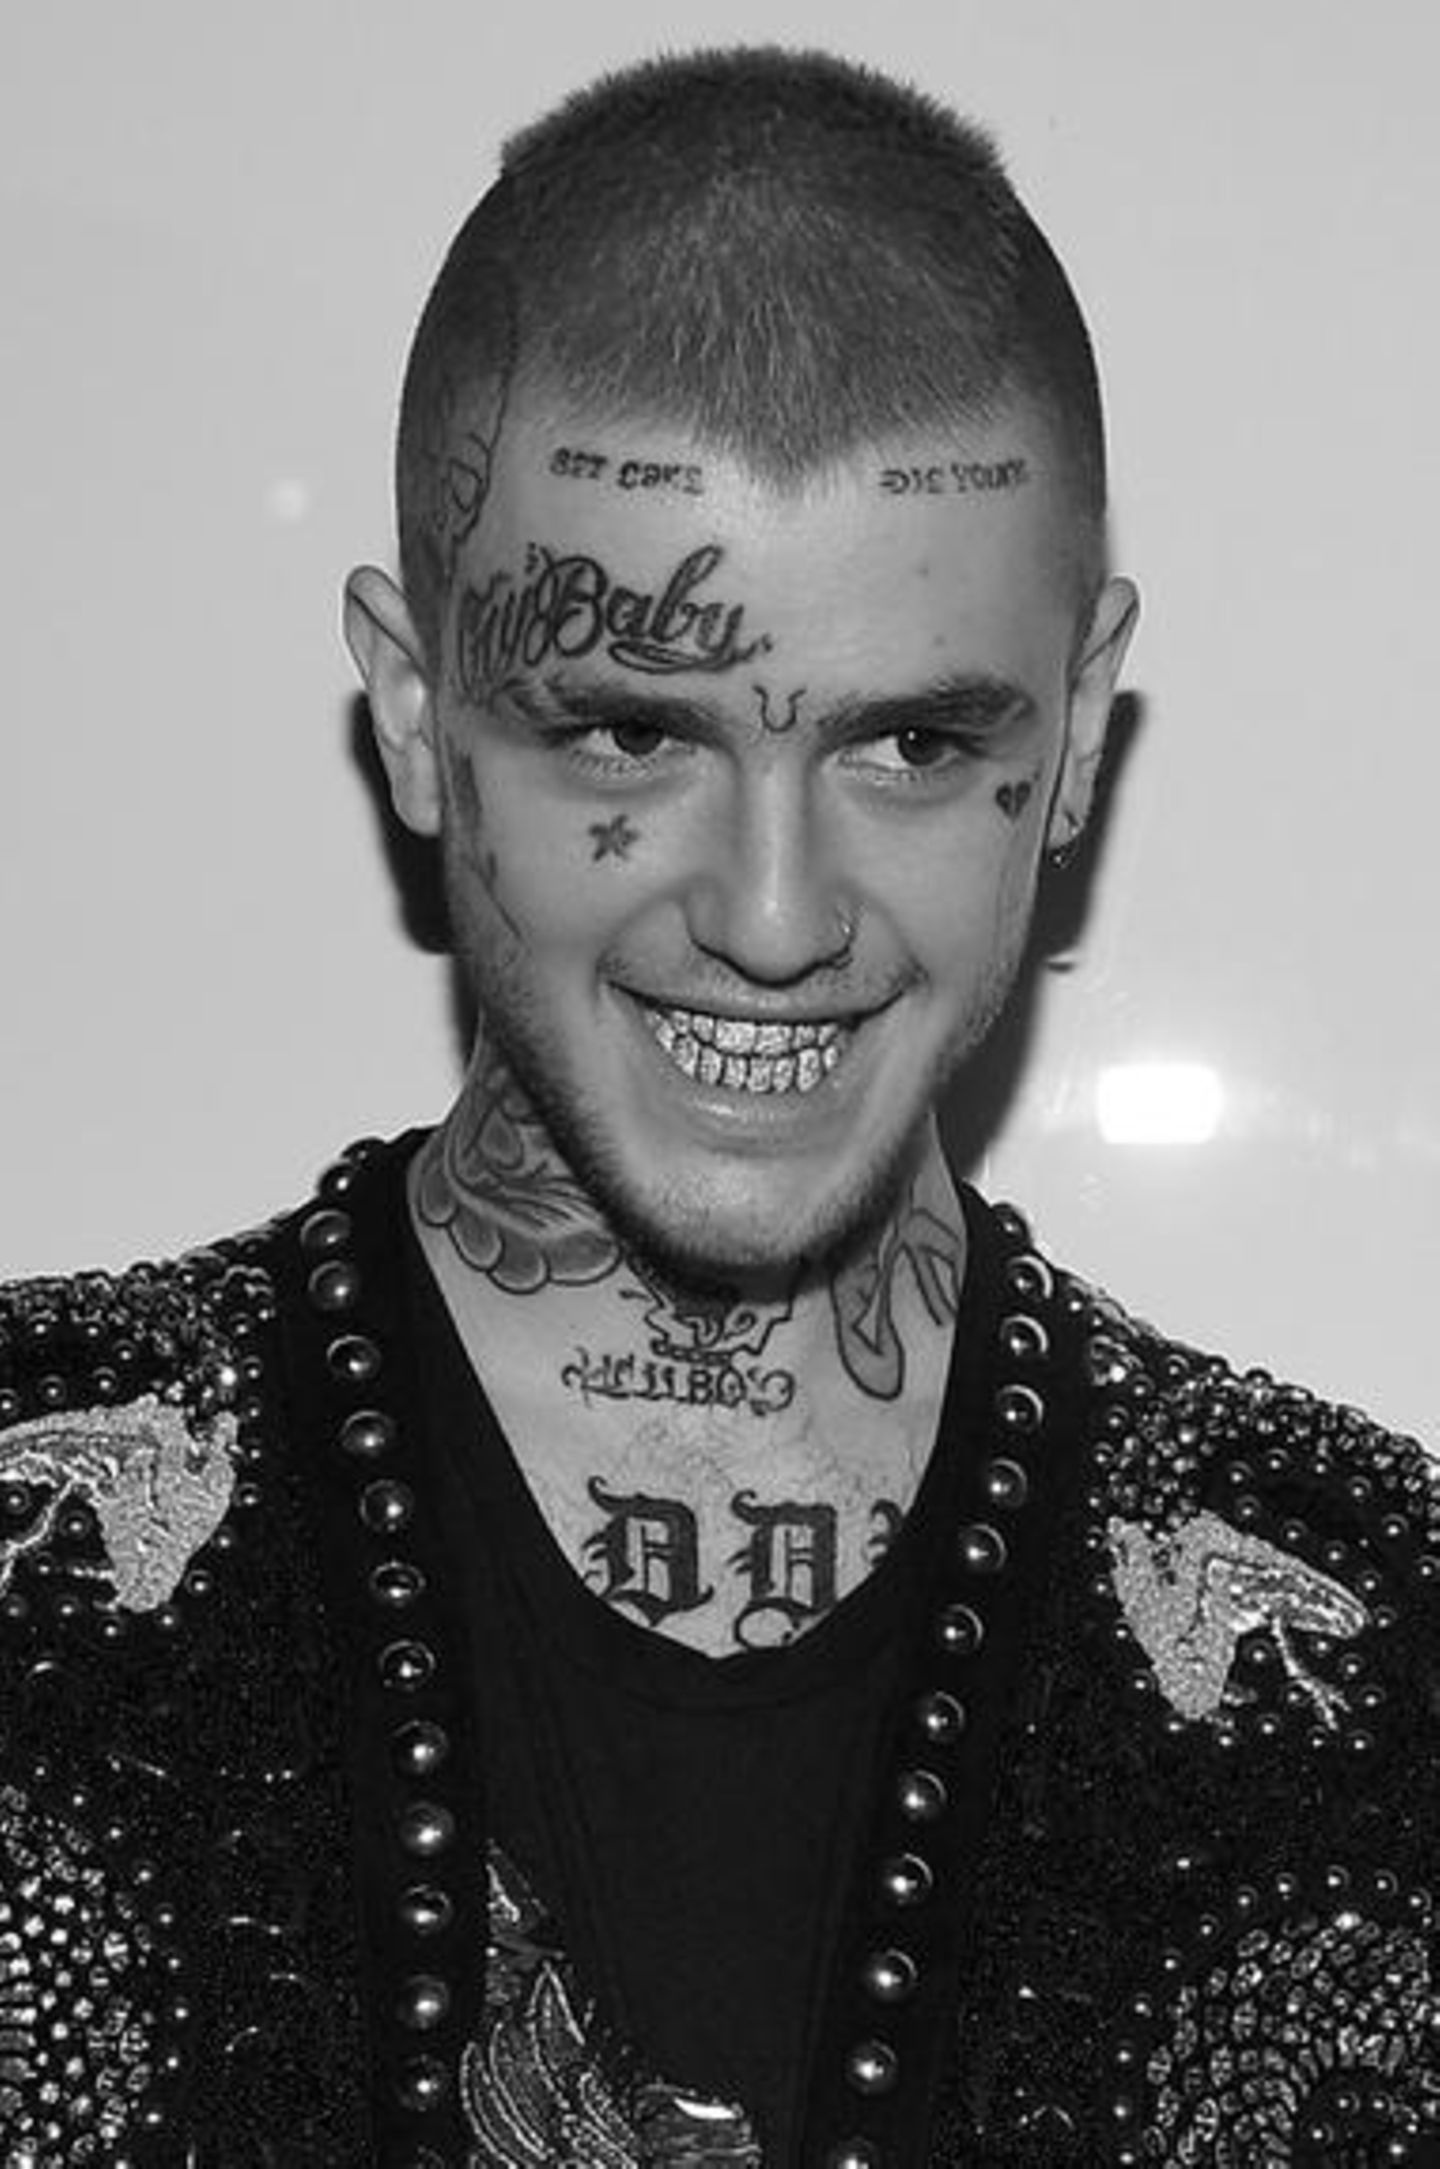 HD wallpaper, Emotional Farewell, Lil Peep, Tributes To Rapper, 1440X2170 Hd Phone, Mobile Hd Lil Peep Background Image, Moving Funeral